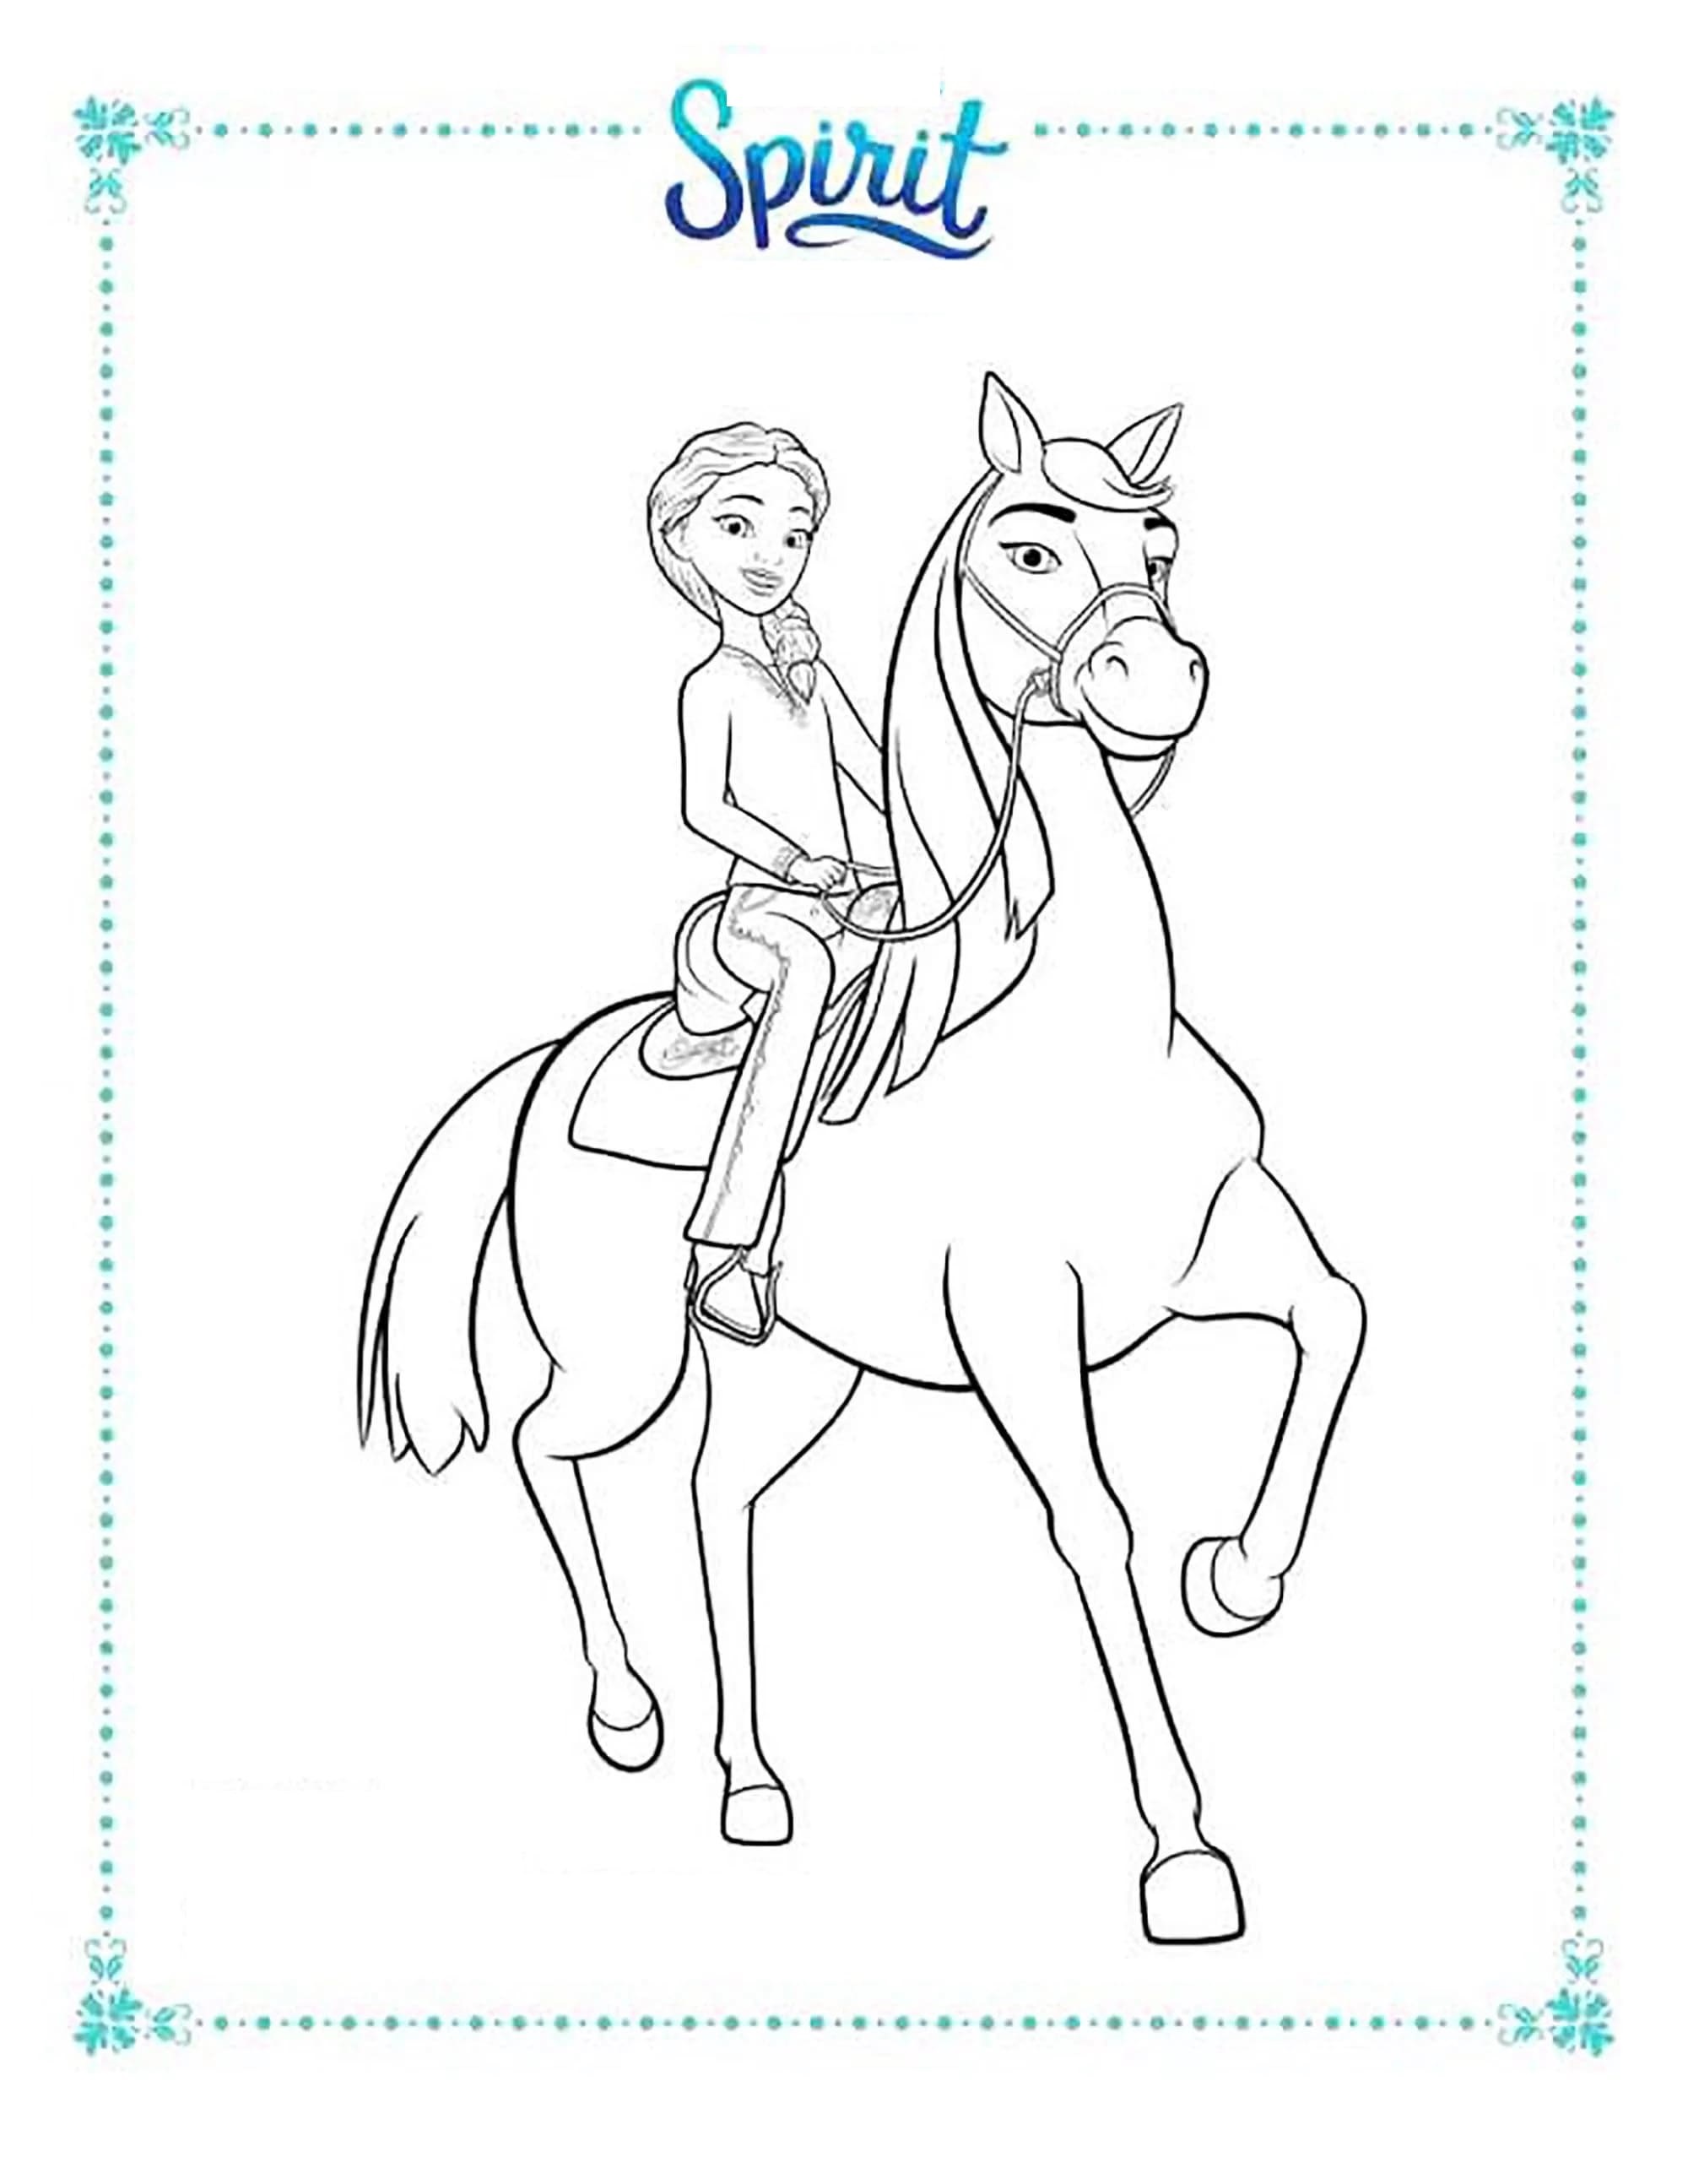 Spirit Riding Free Coloring Pages